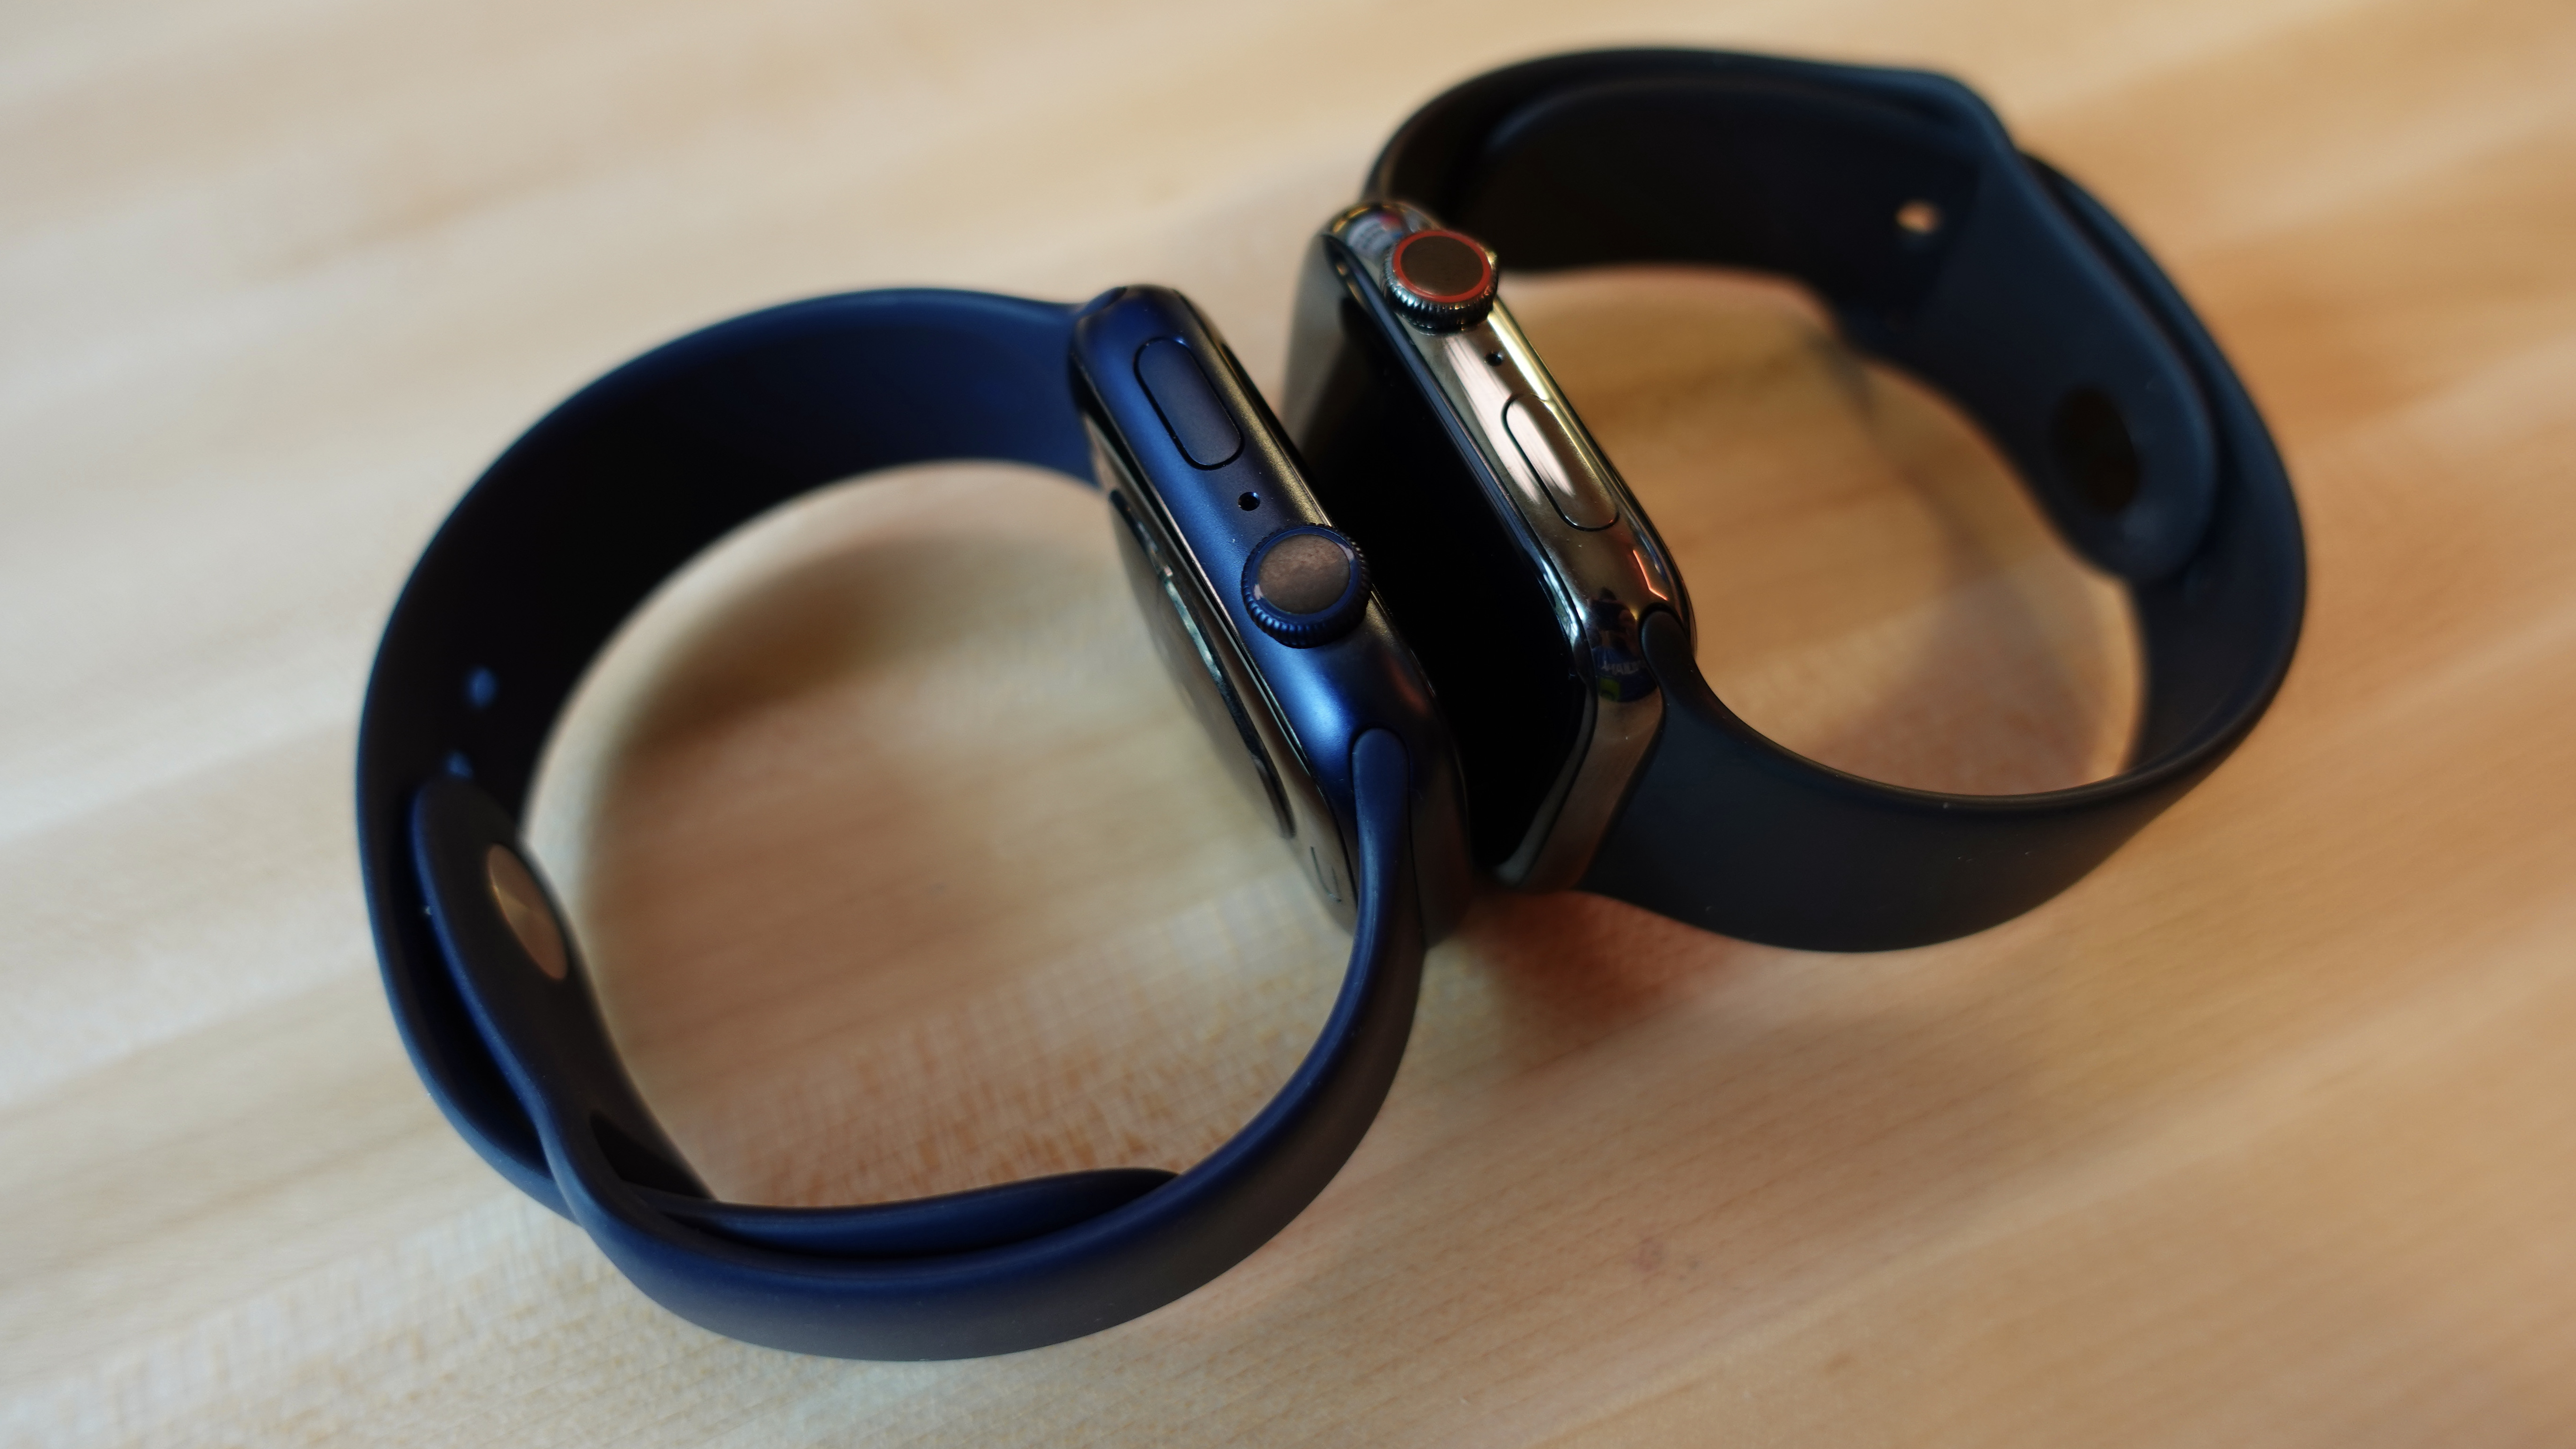 Apple Watch Series 6 Diary: Graphite hands-on and battery life